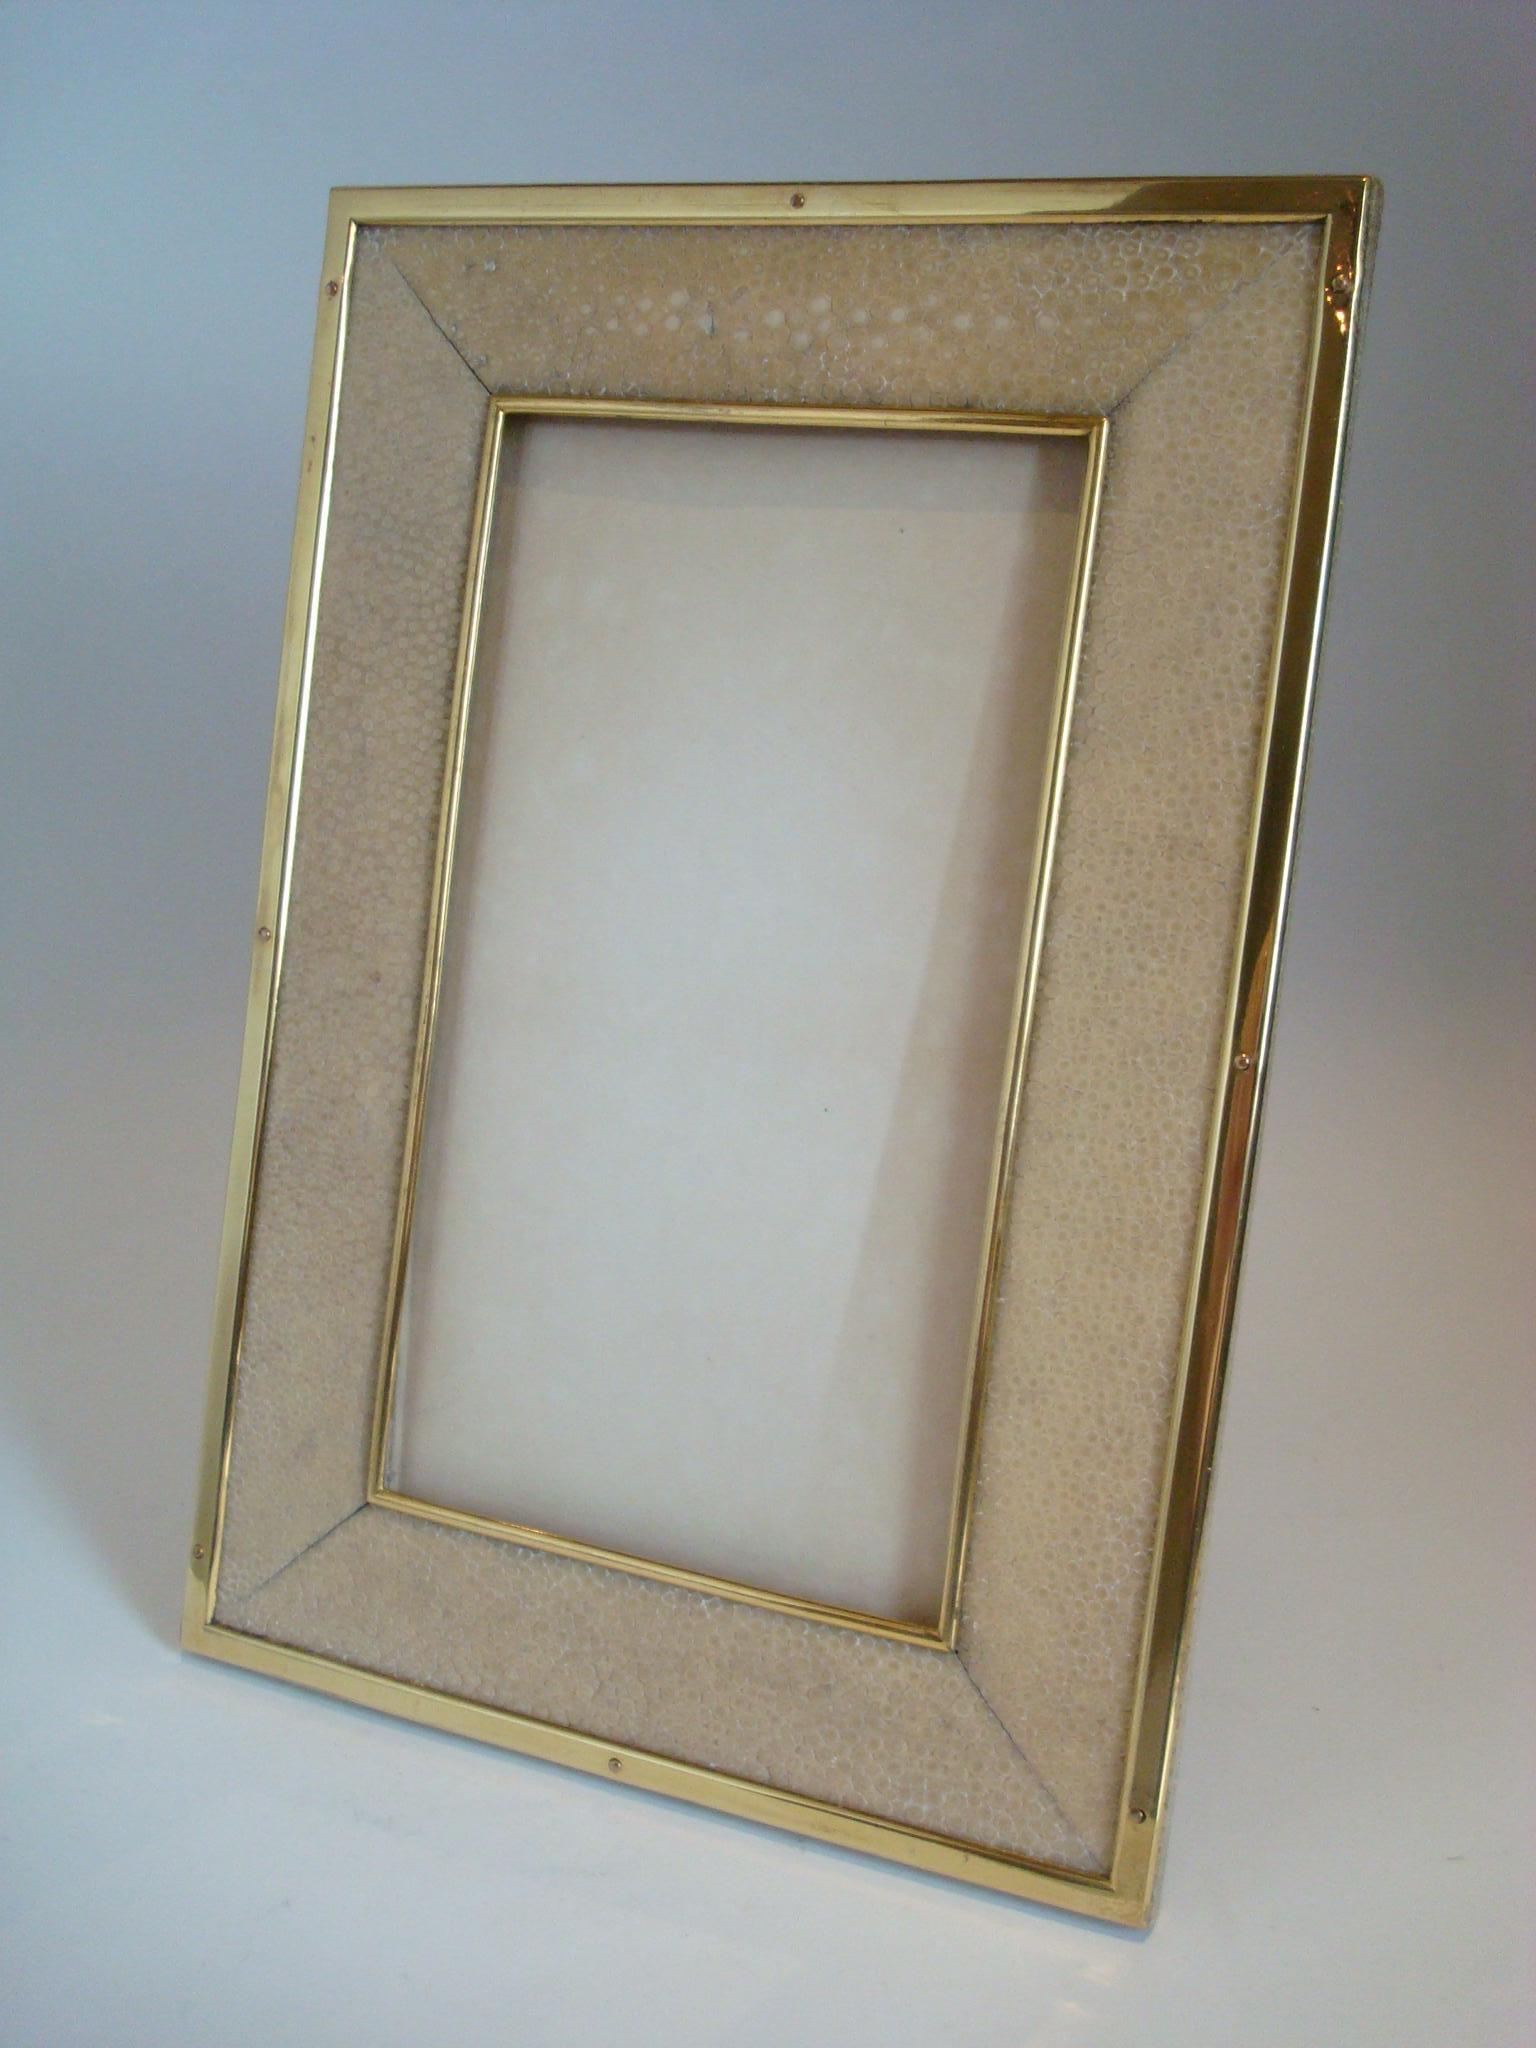 Art Deco Shagreen photograph frame, c. 1925.
20th century vintage Shagreen (Galuchat) leather photo frame.
Very well made rectangular Shagreen frame with gilt bronze borders, as shown on the images the shagreen is a great color. The back is also